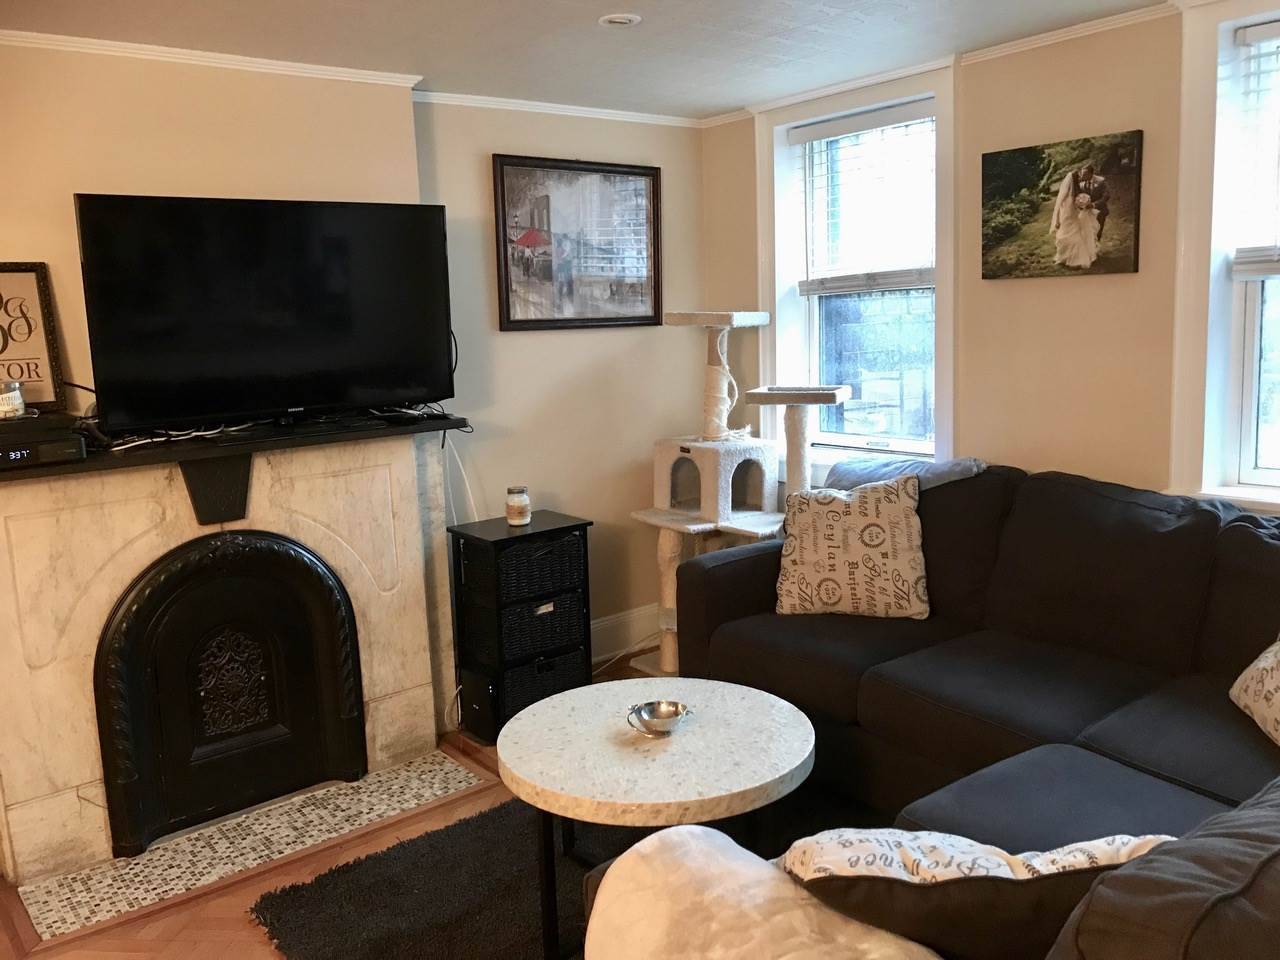 Updated unit with Hardwood floor - 1 BR New Jersey